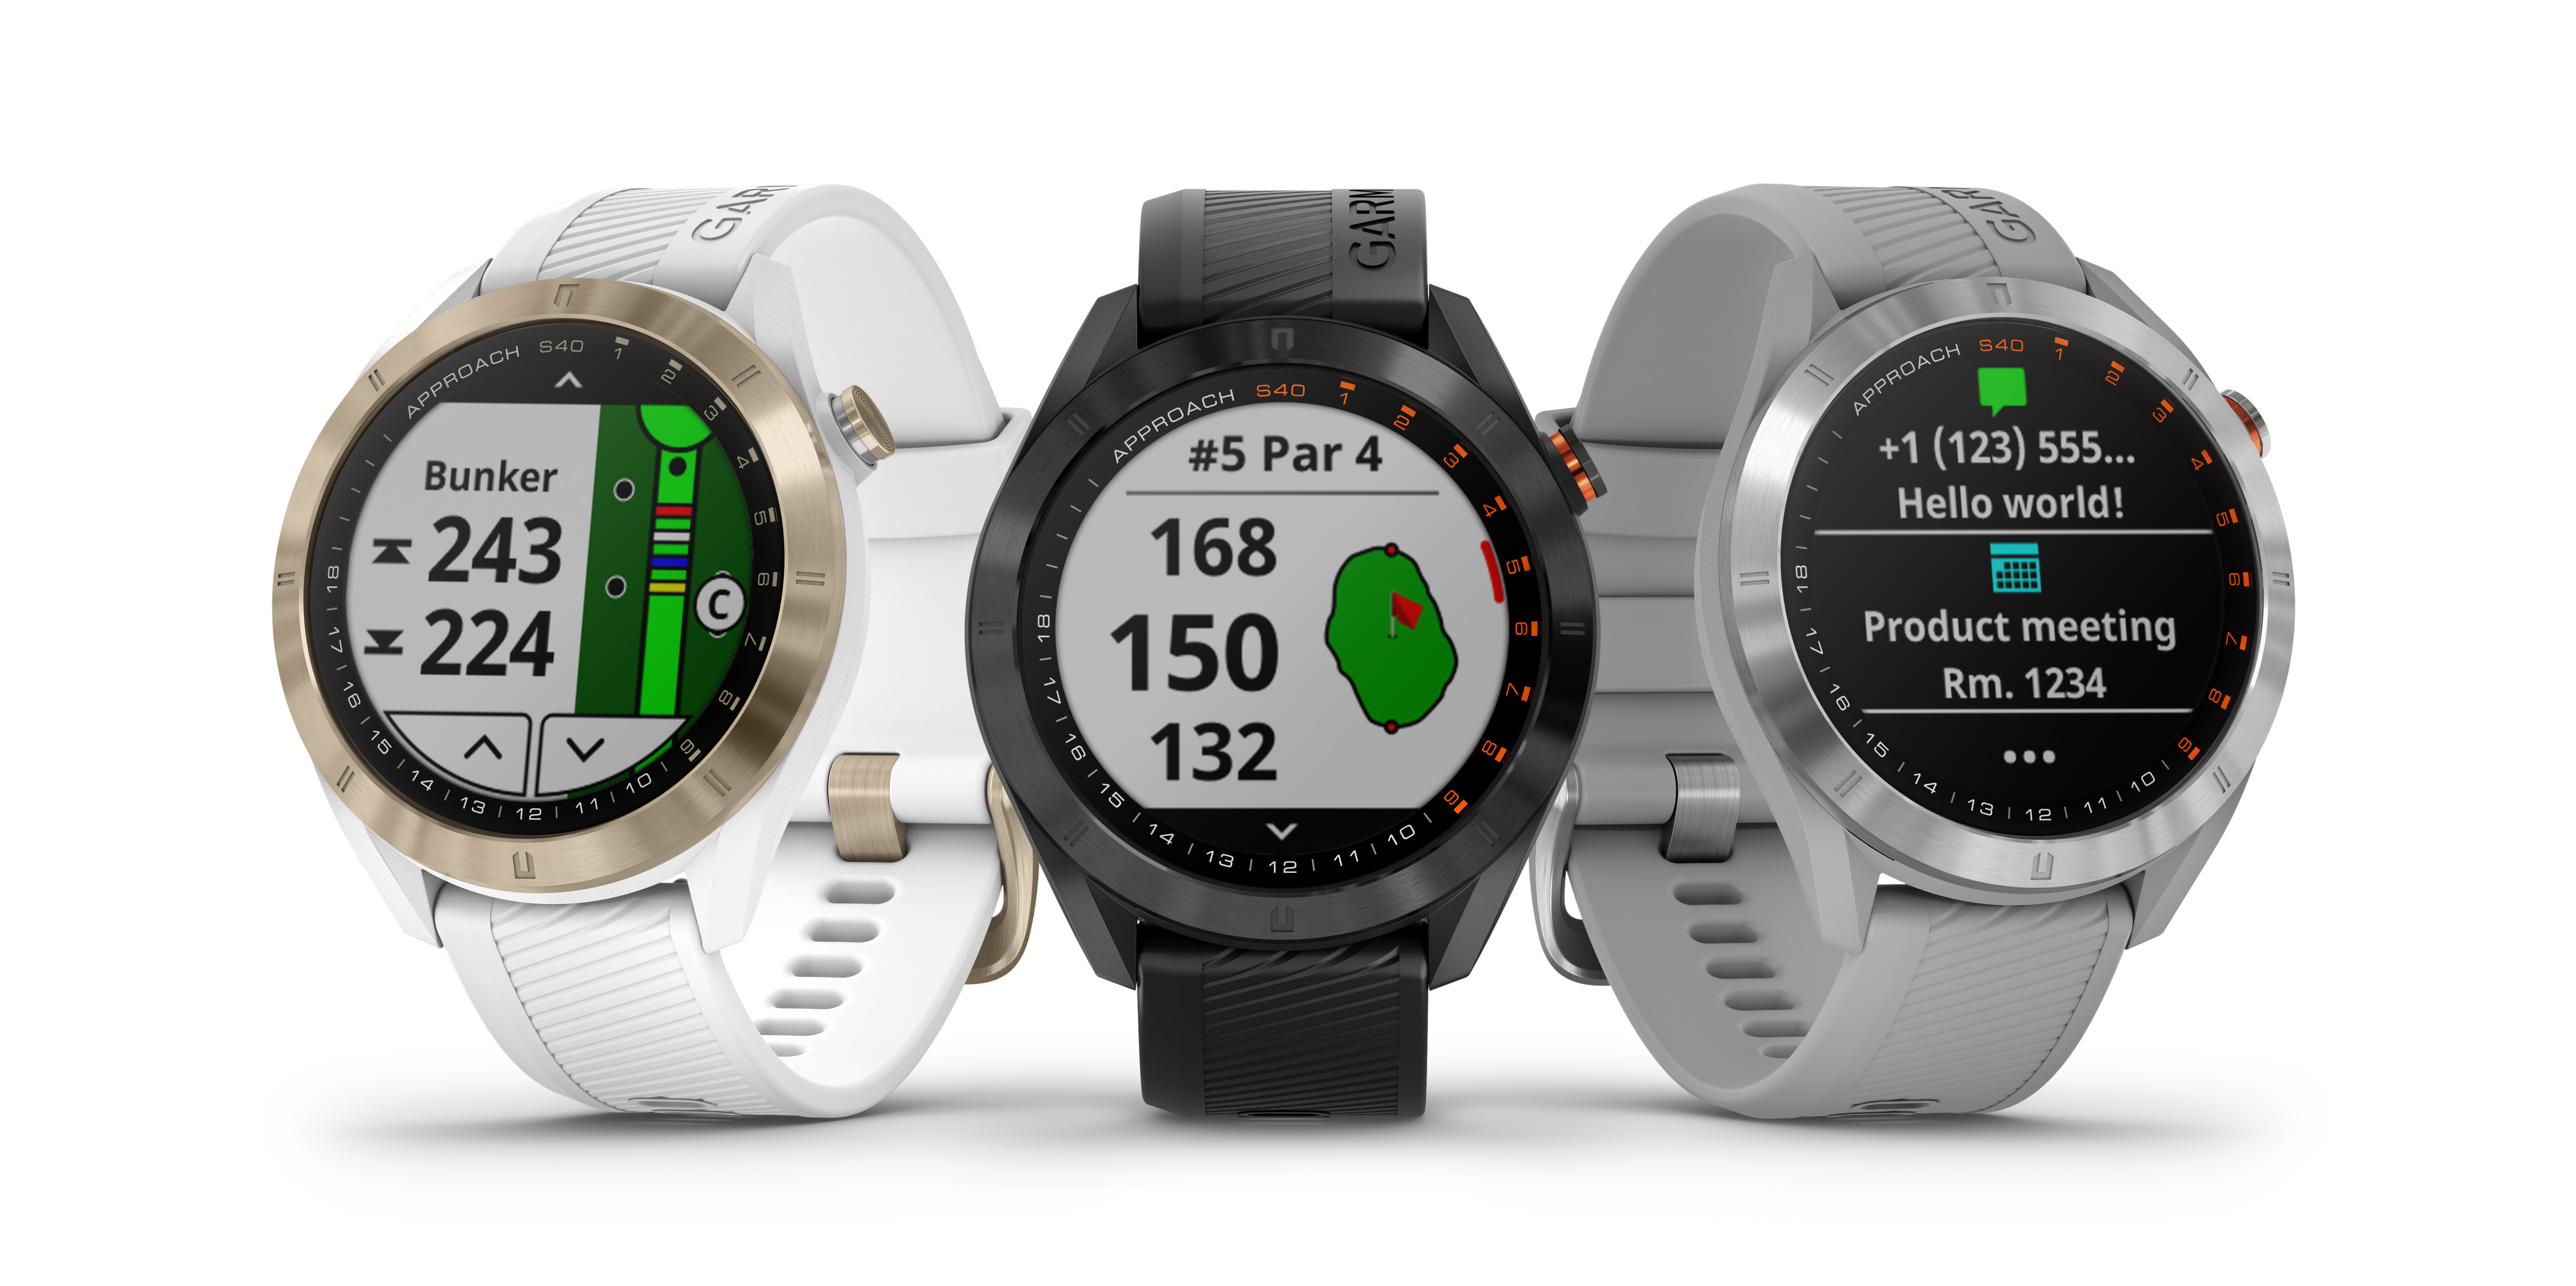 Garmin® unveils the Approach® S40 GPS: A stylish everyday smartwatch for  golfers | Business Wire